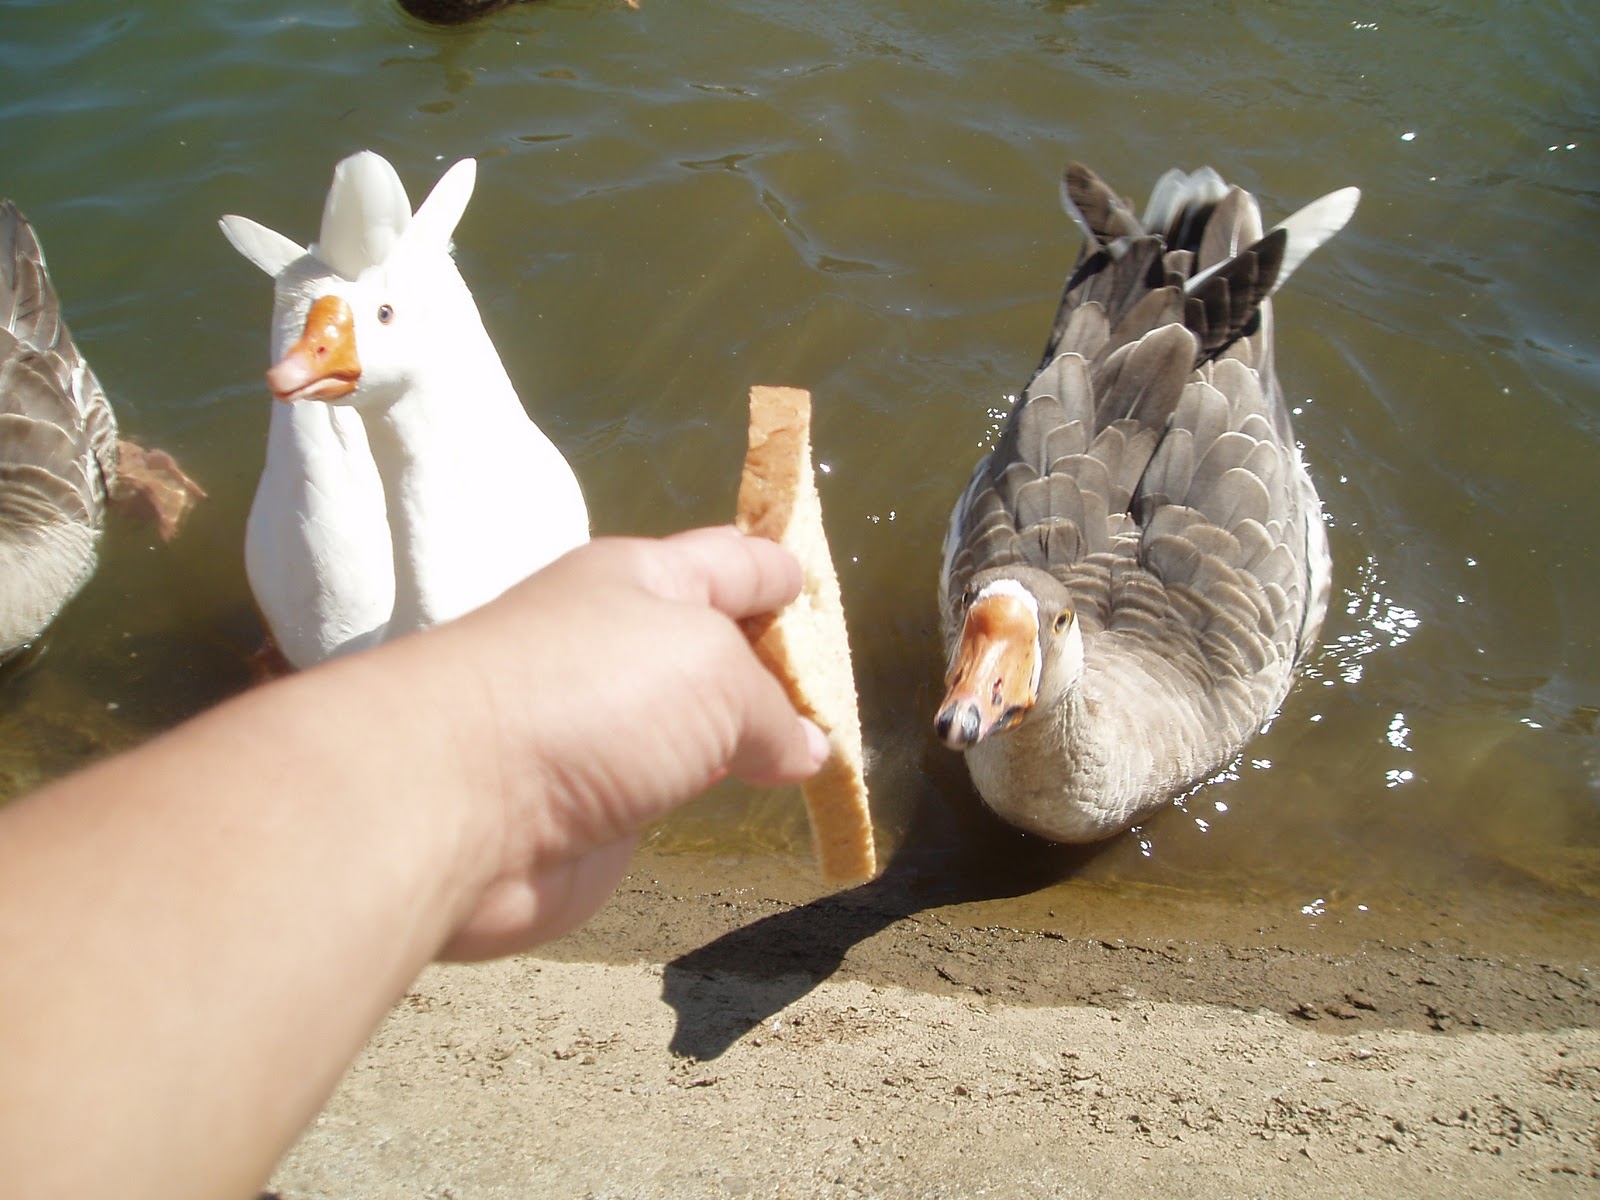 Knoxville MamaBelle: Best place to feed ducks